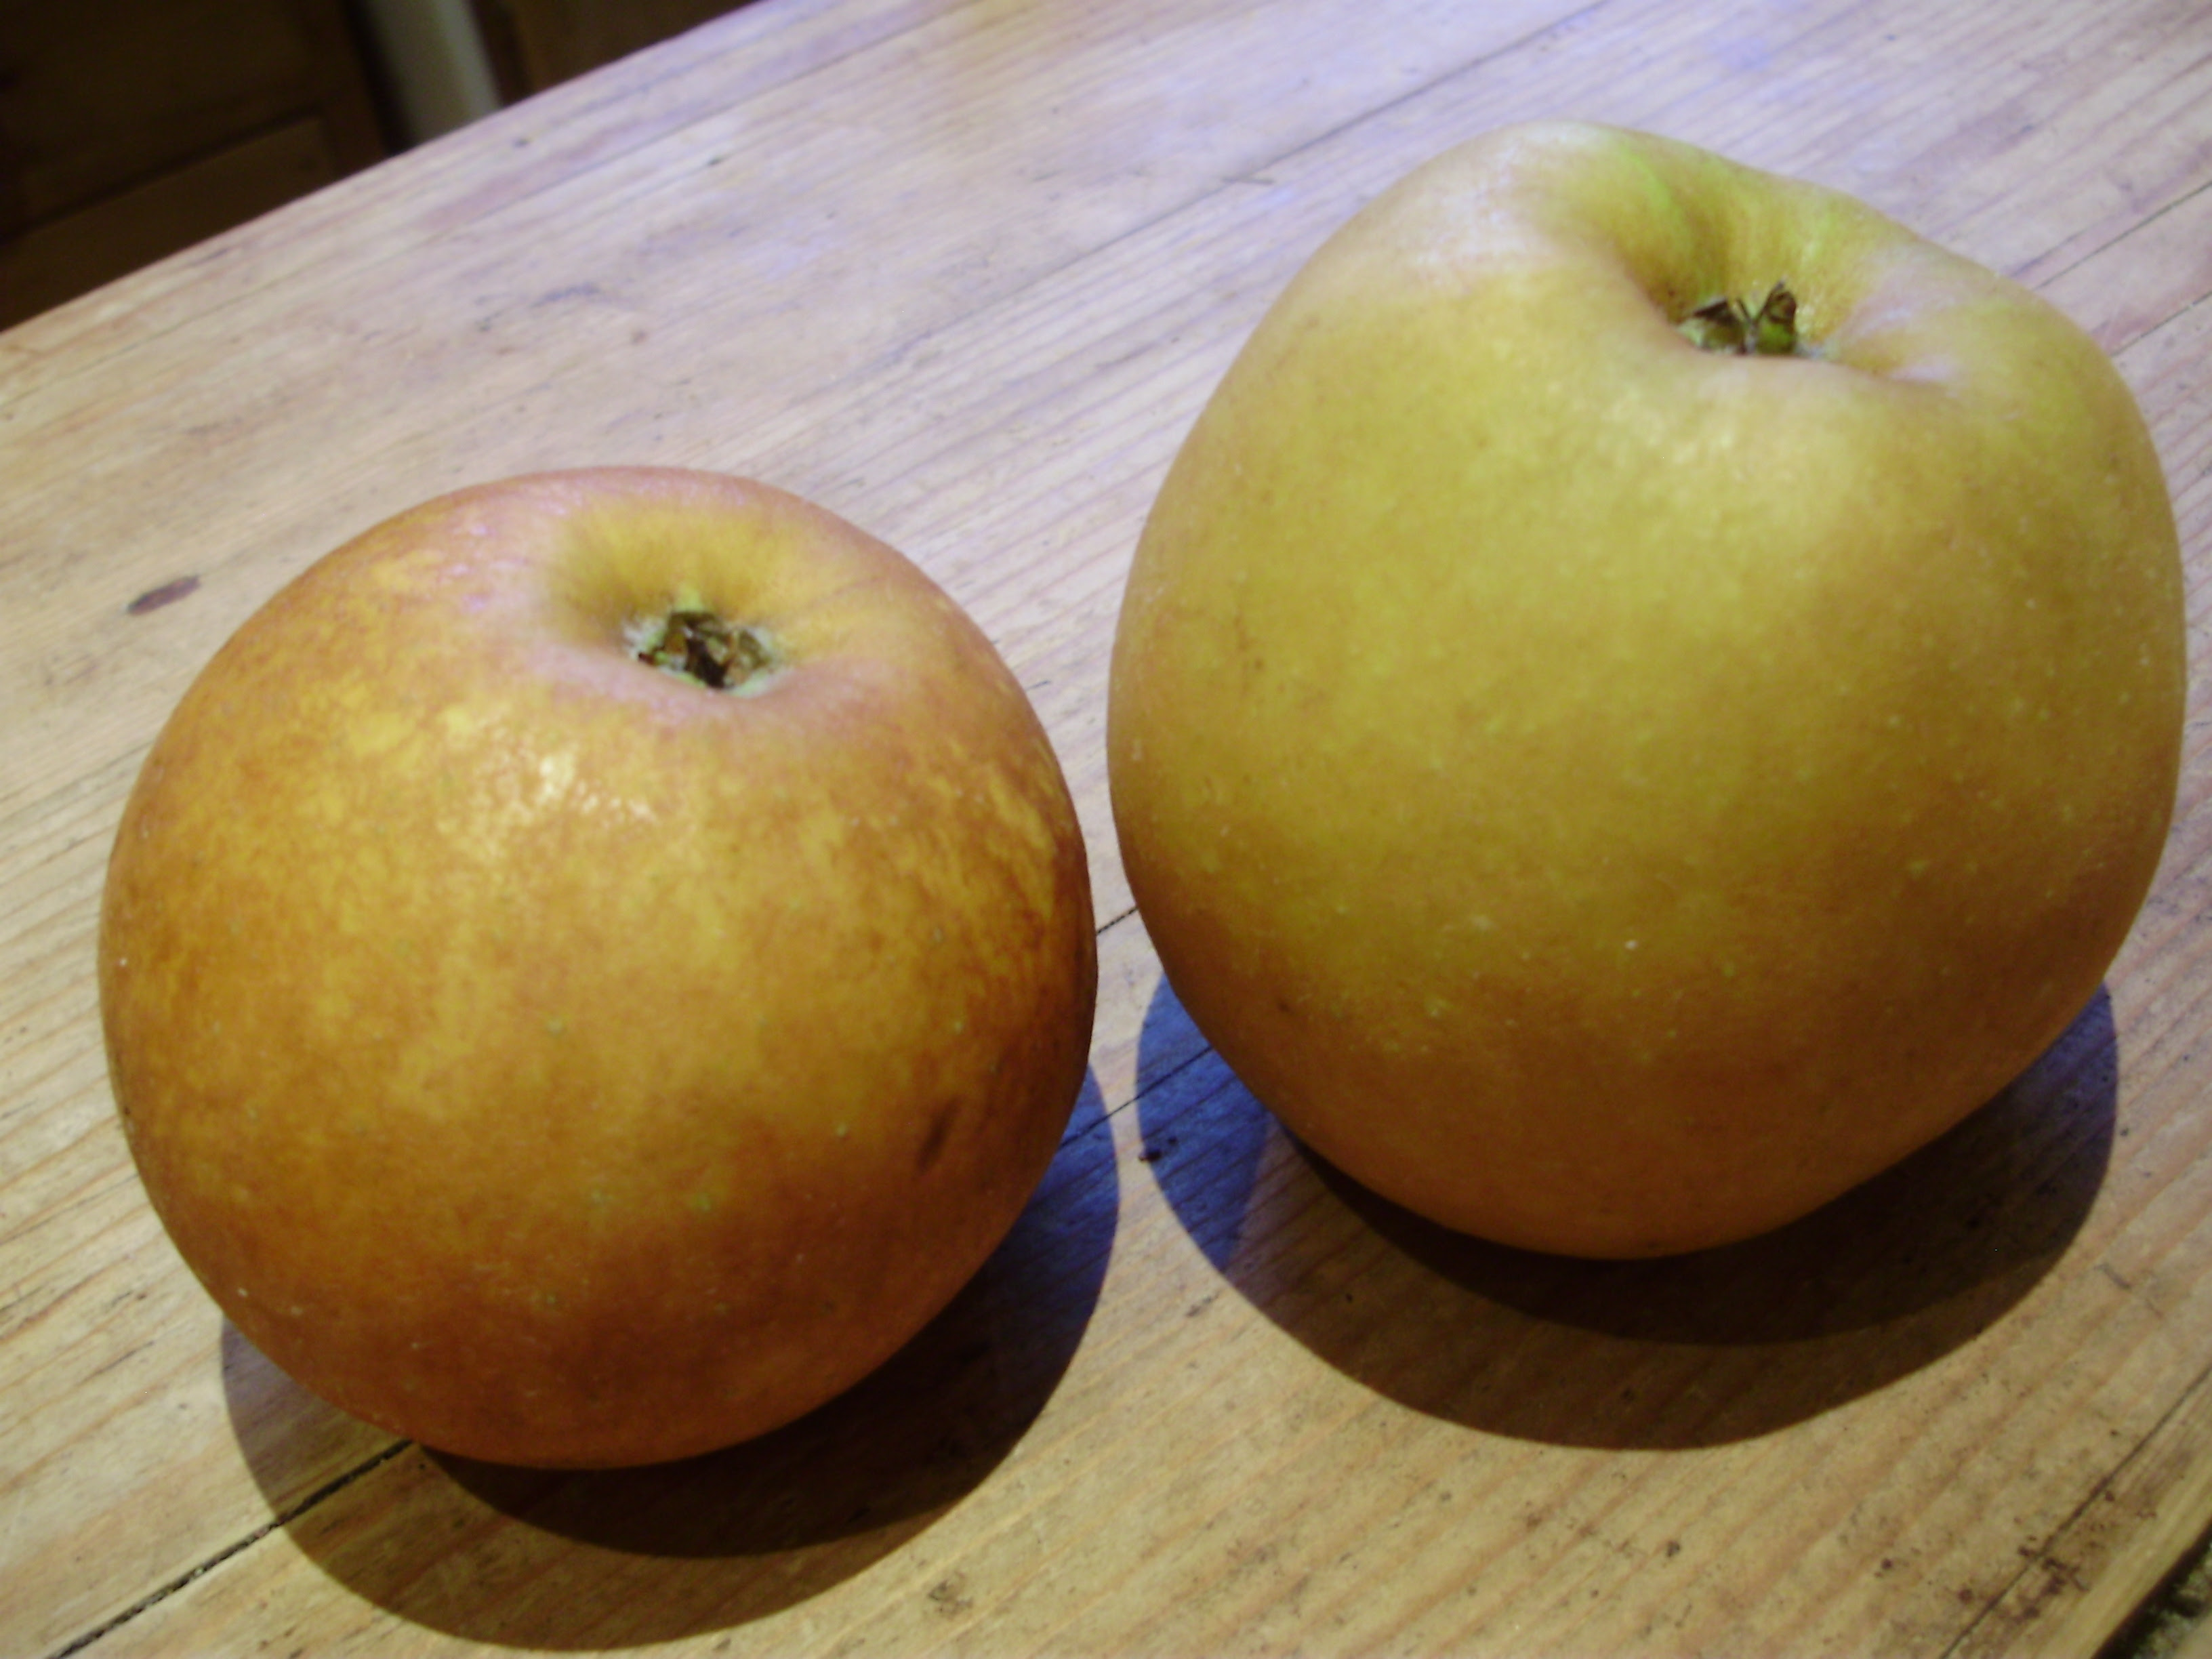 Russet apples Egremont Russet and Ashmead's Kernal are at their best now